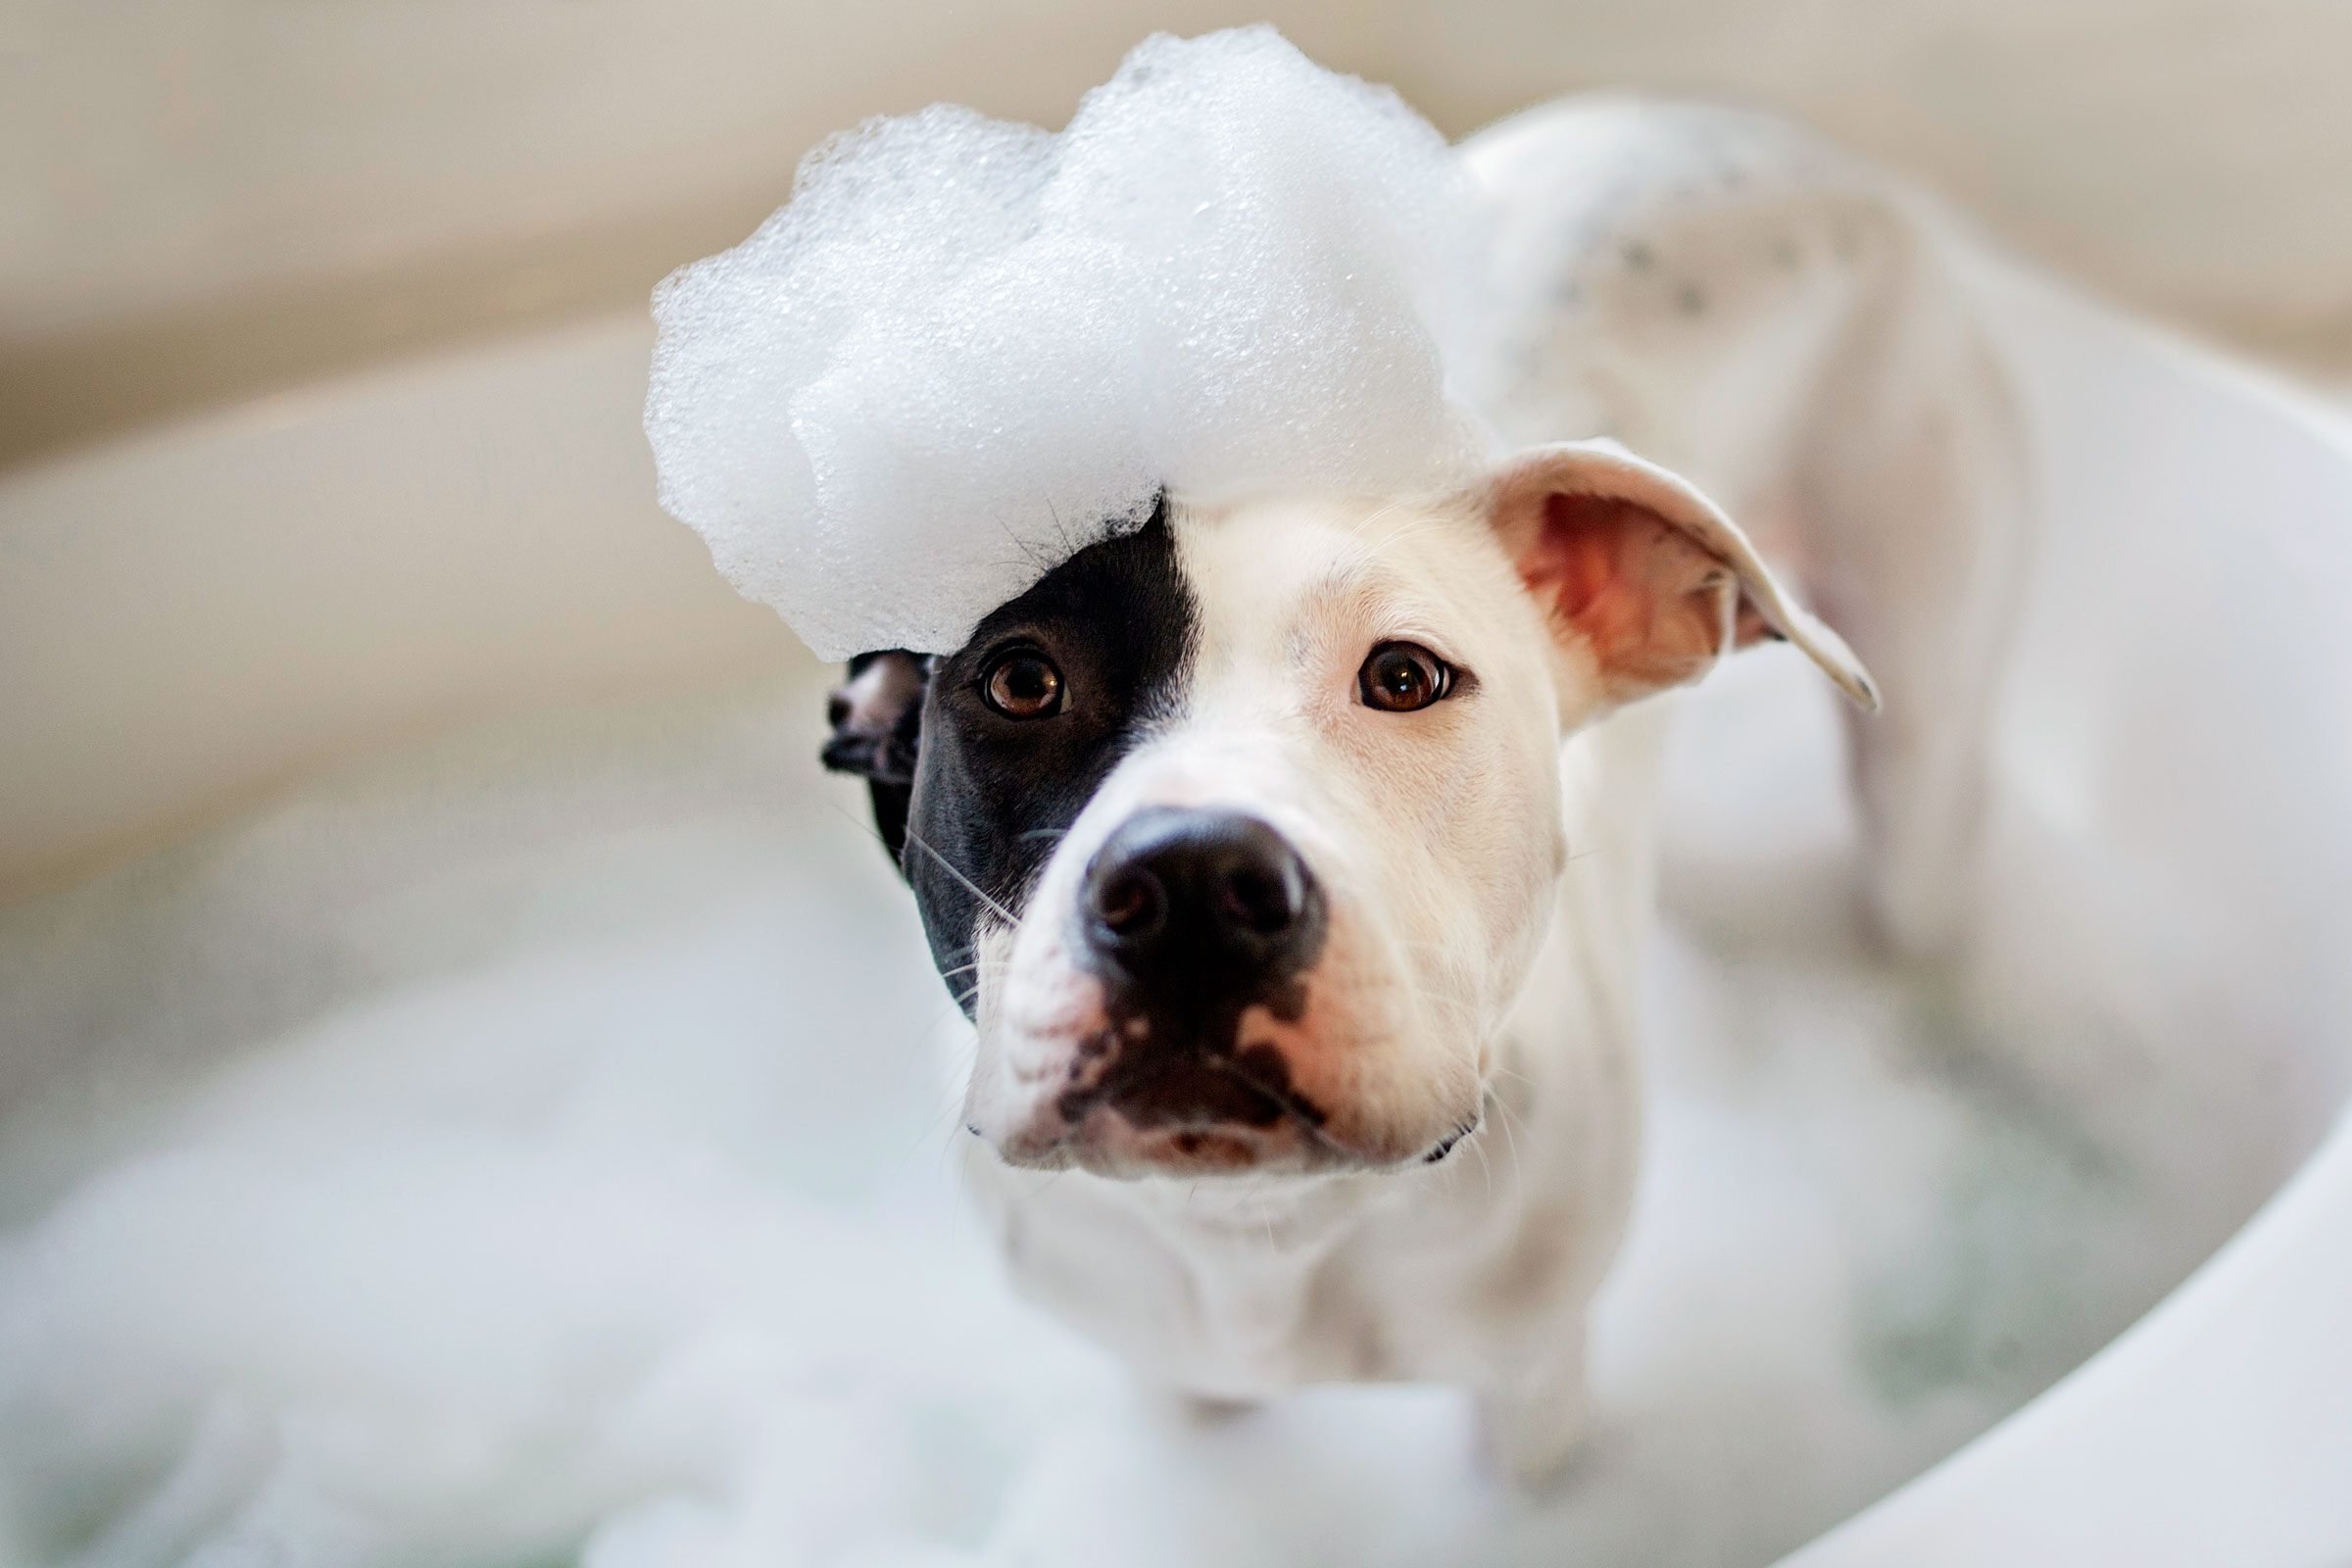  dog in bath with suds on them